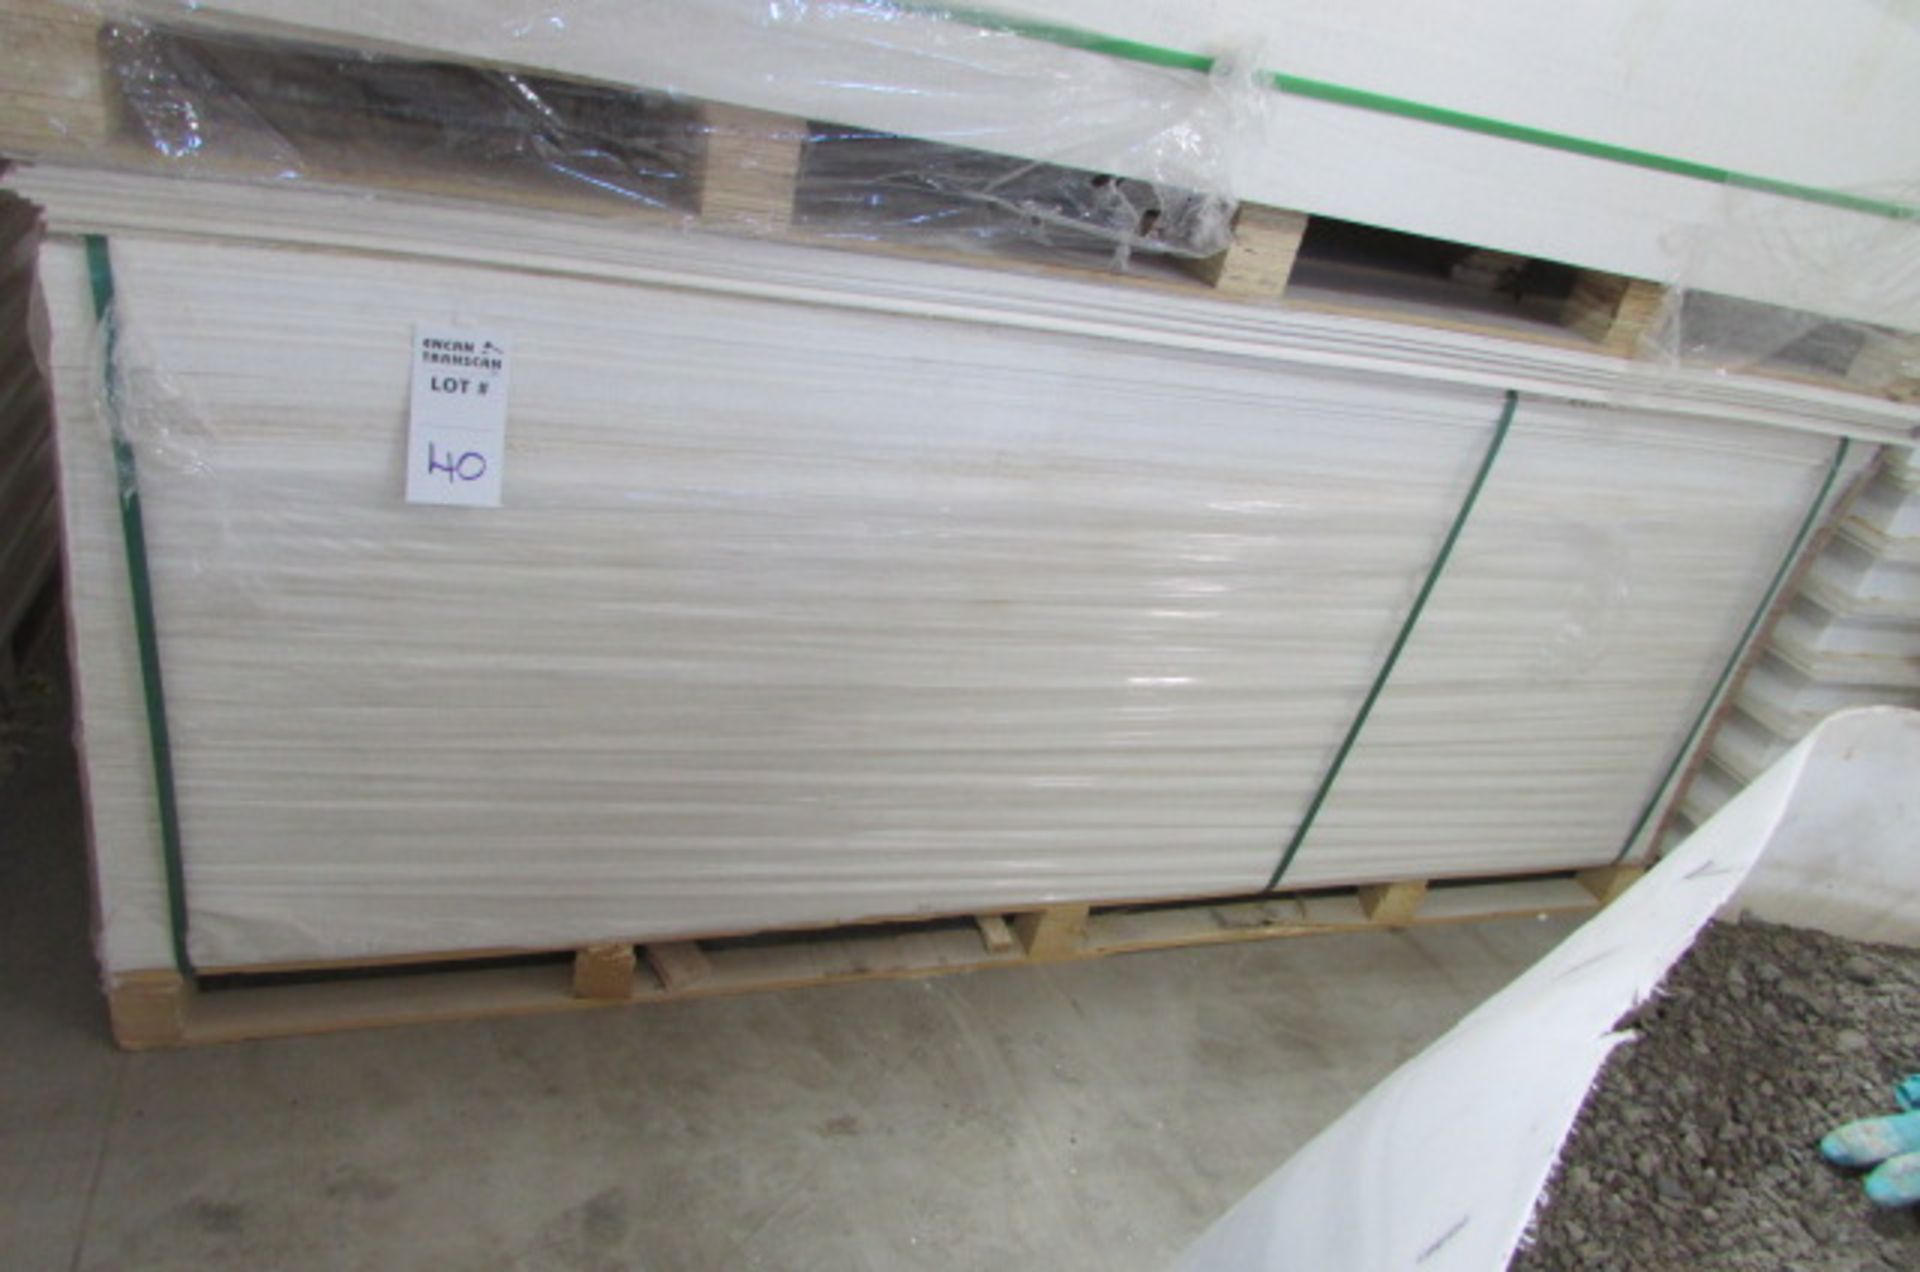 (75) MAGNESIUM OXIDE SHEETS, 3mm, 4' x 8' - Image 2 of 2